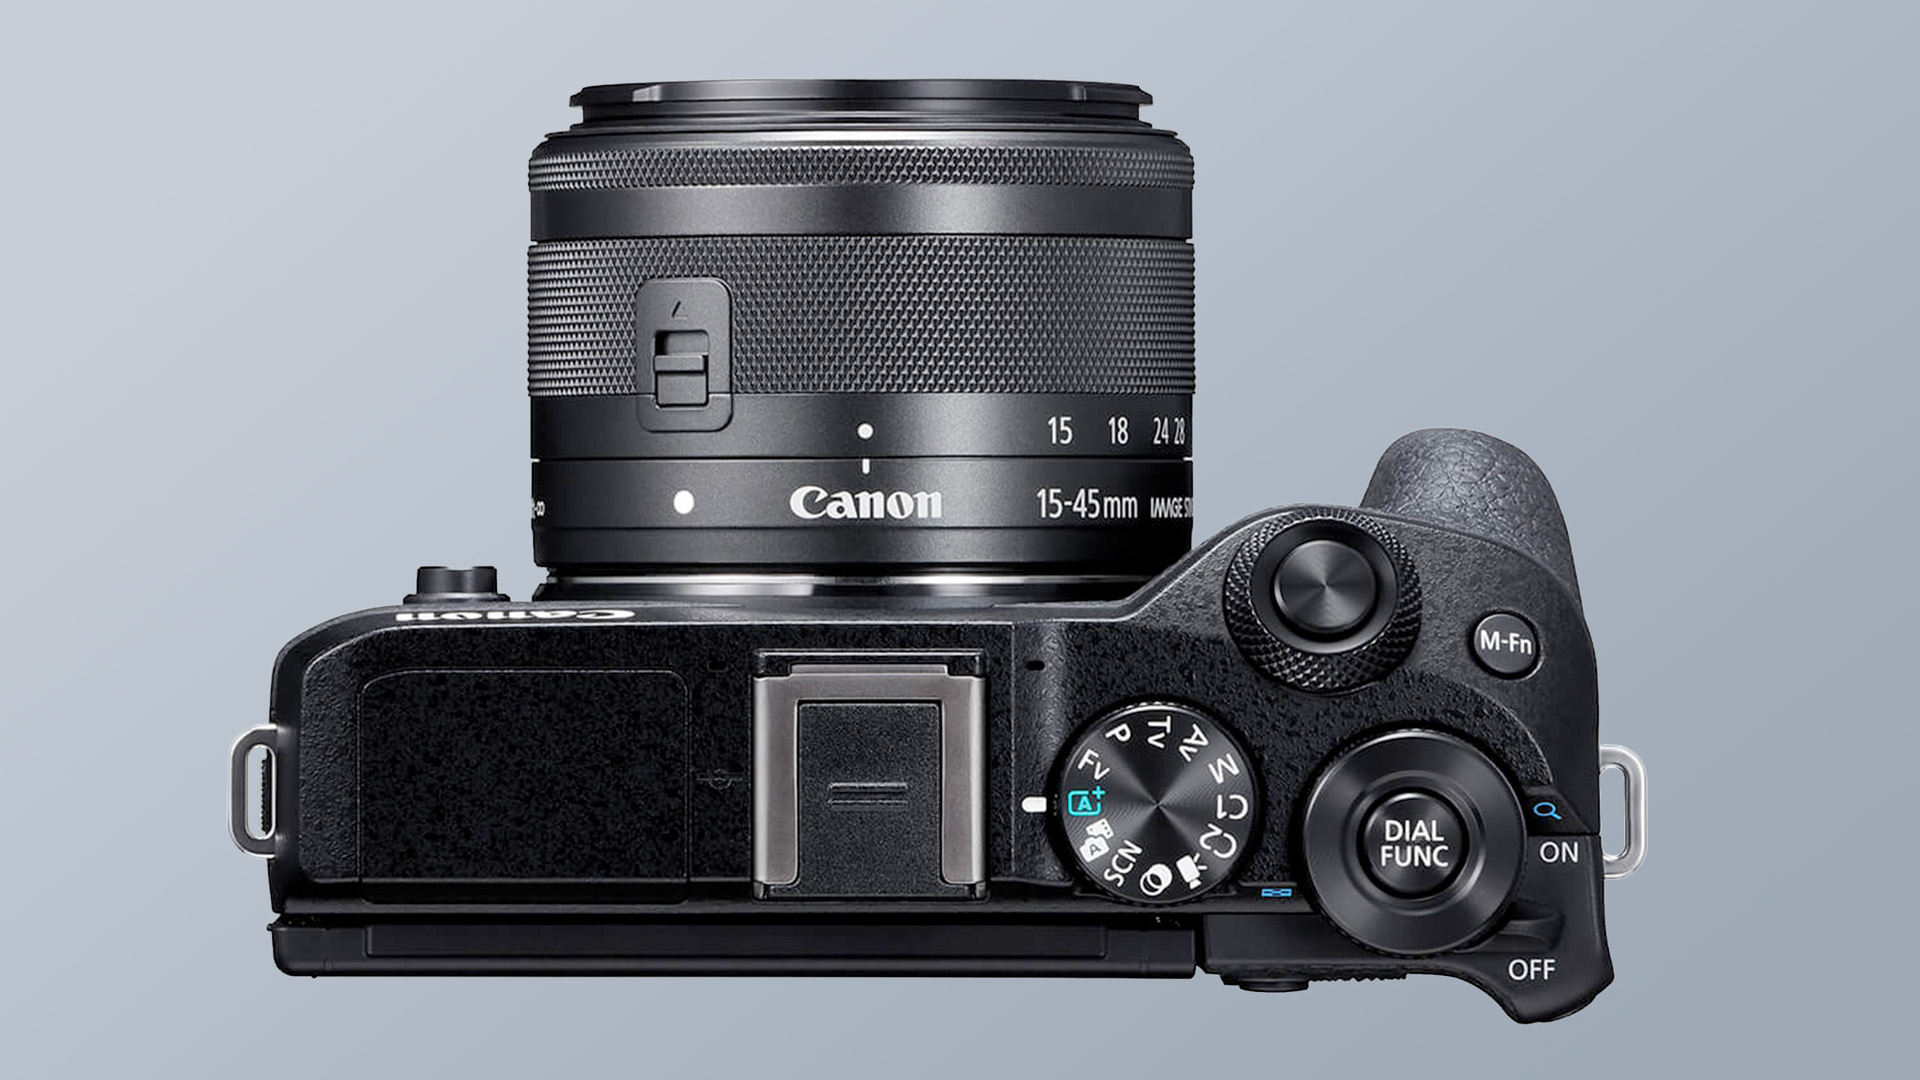 A simulated image of the supposed Canon EOS R100 mirrorless camera